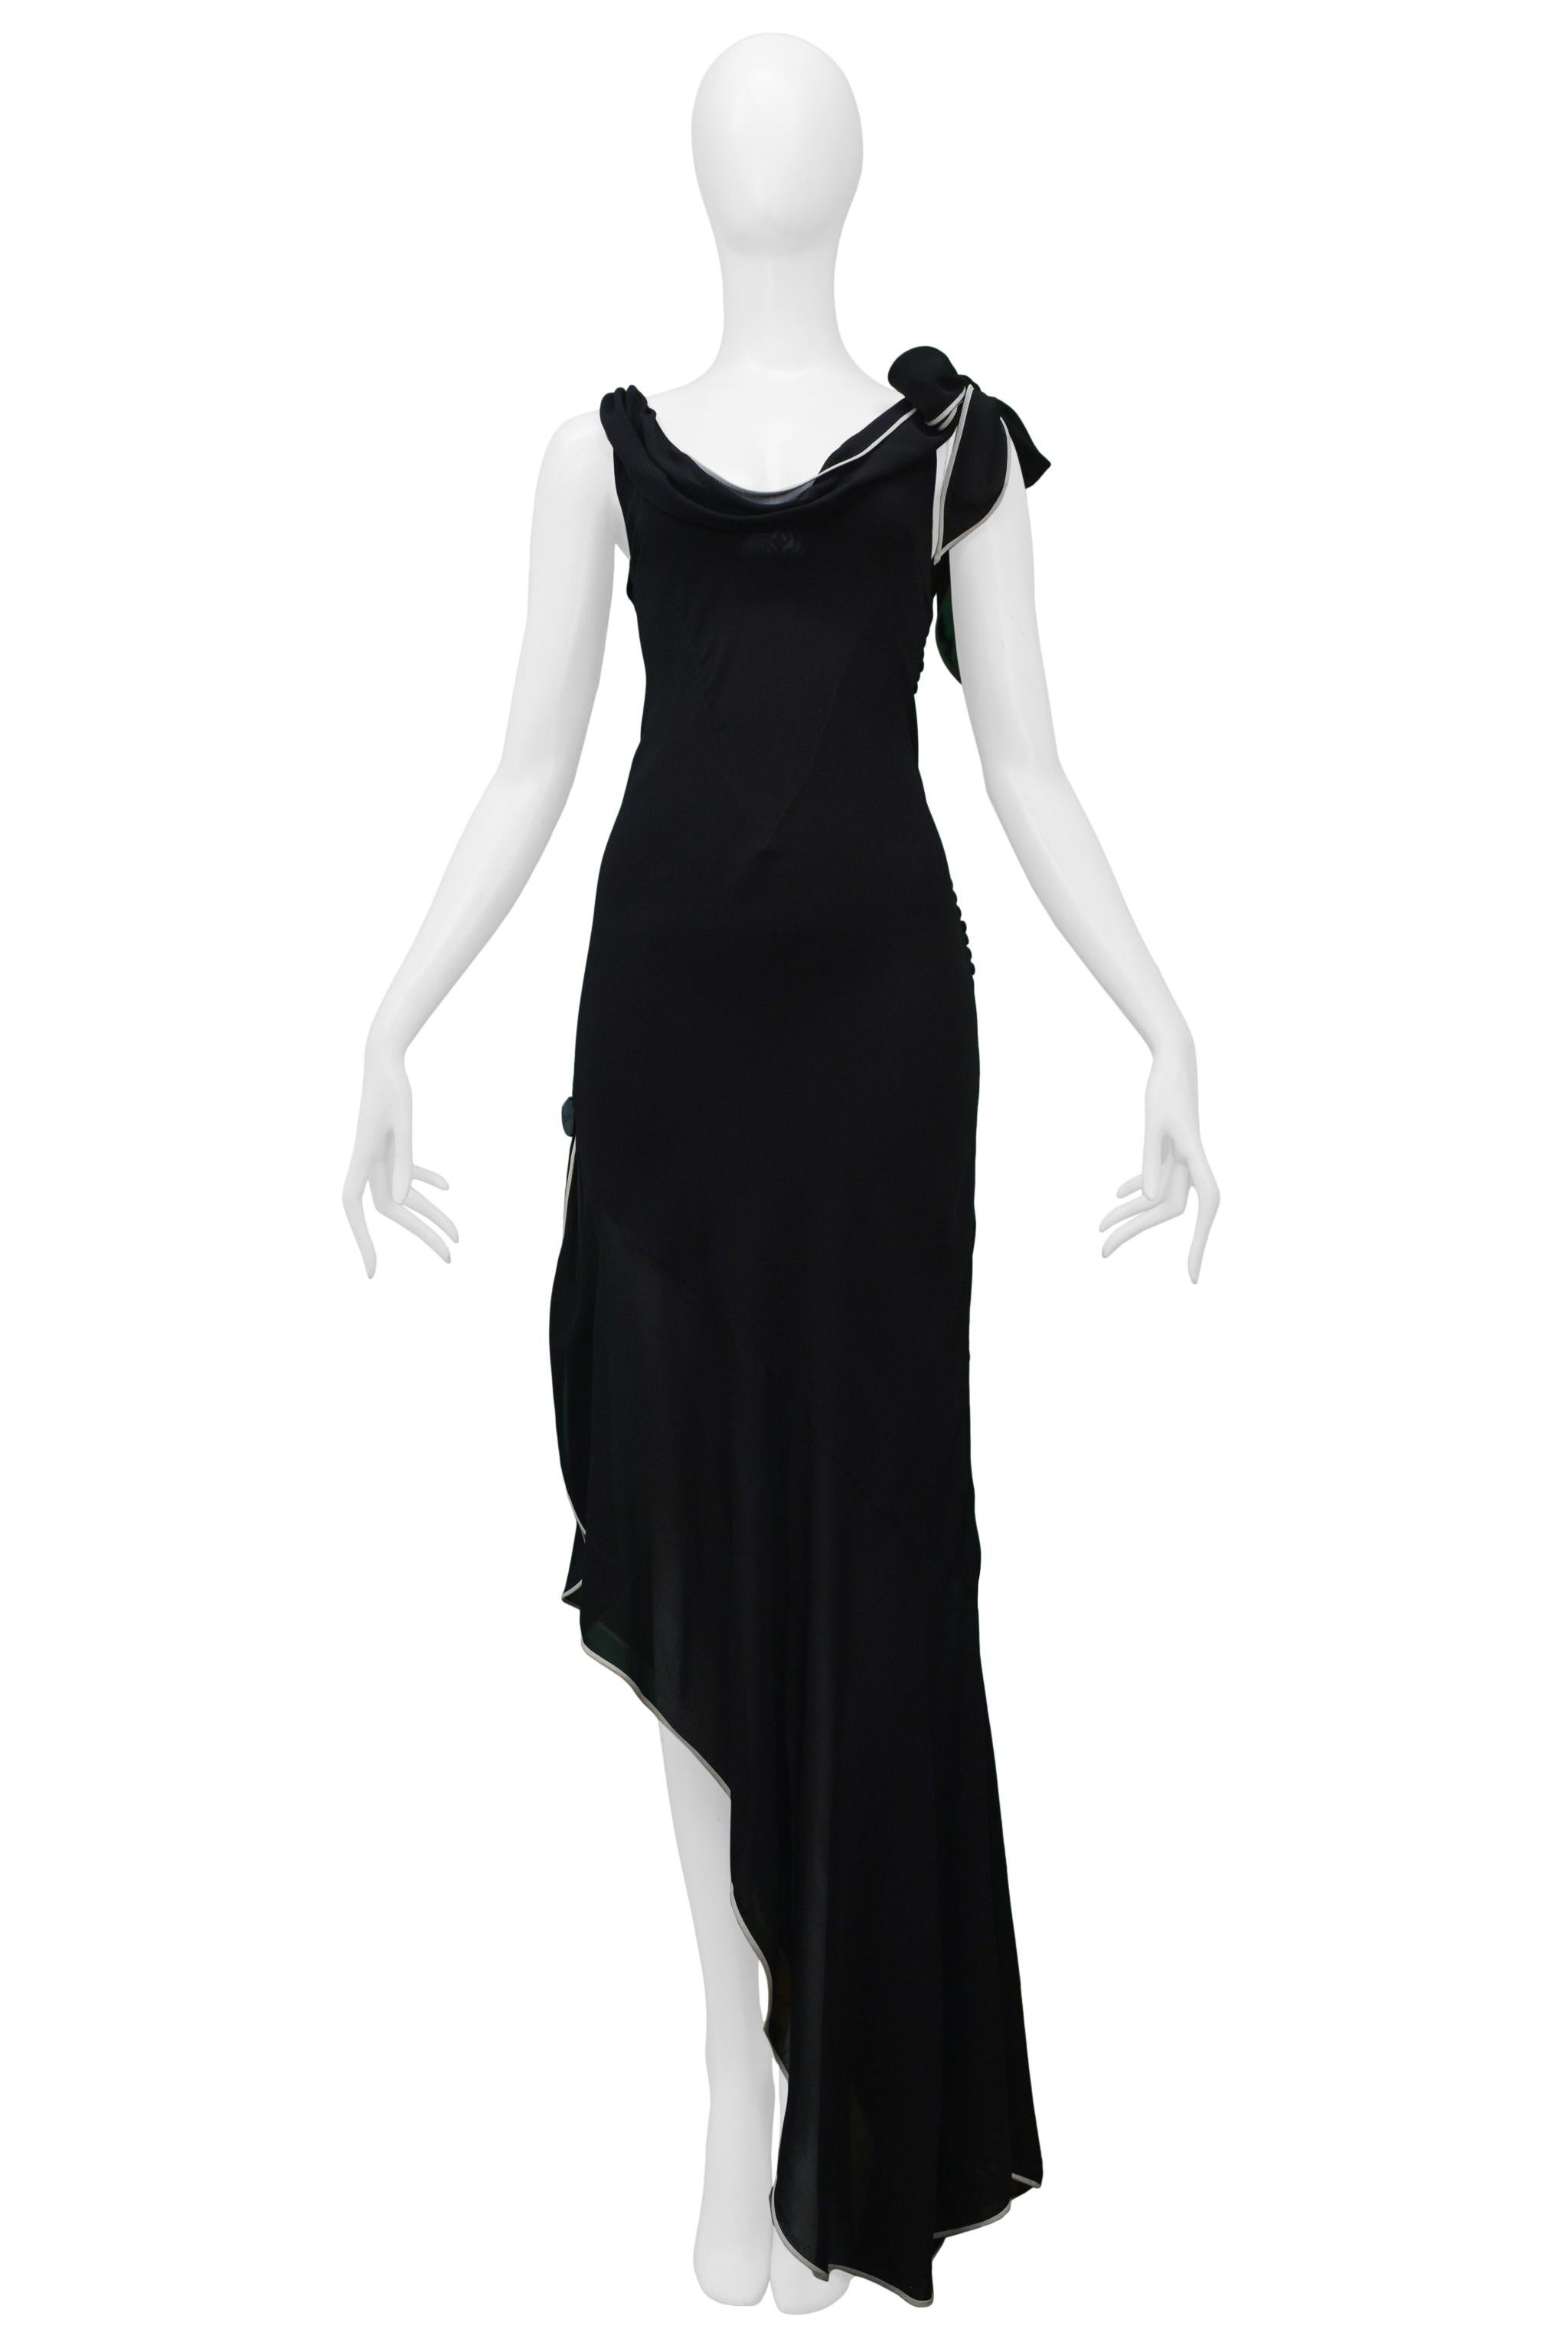 Resurrection is excited to offer a vintage Christian Dior black evening gown featuring chiffon ruffles, a tie strap, white contrasting trim, asymmetrical skirt, side buttons, and decorative 